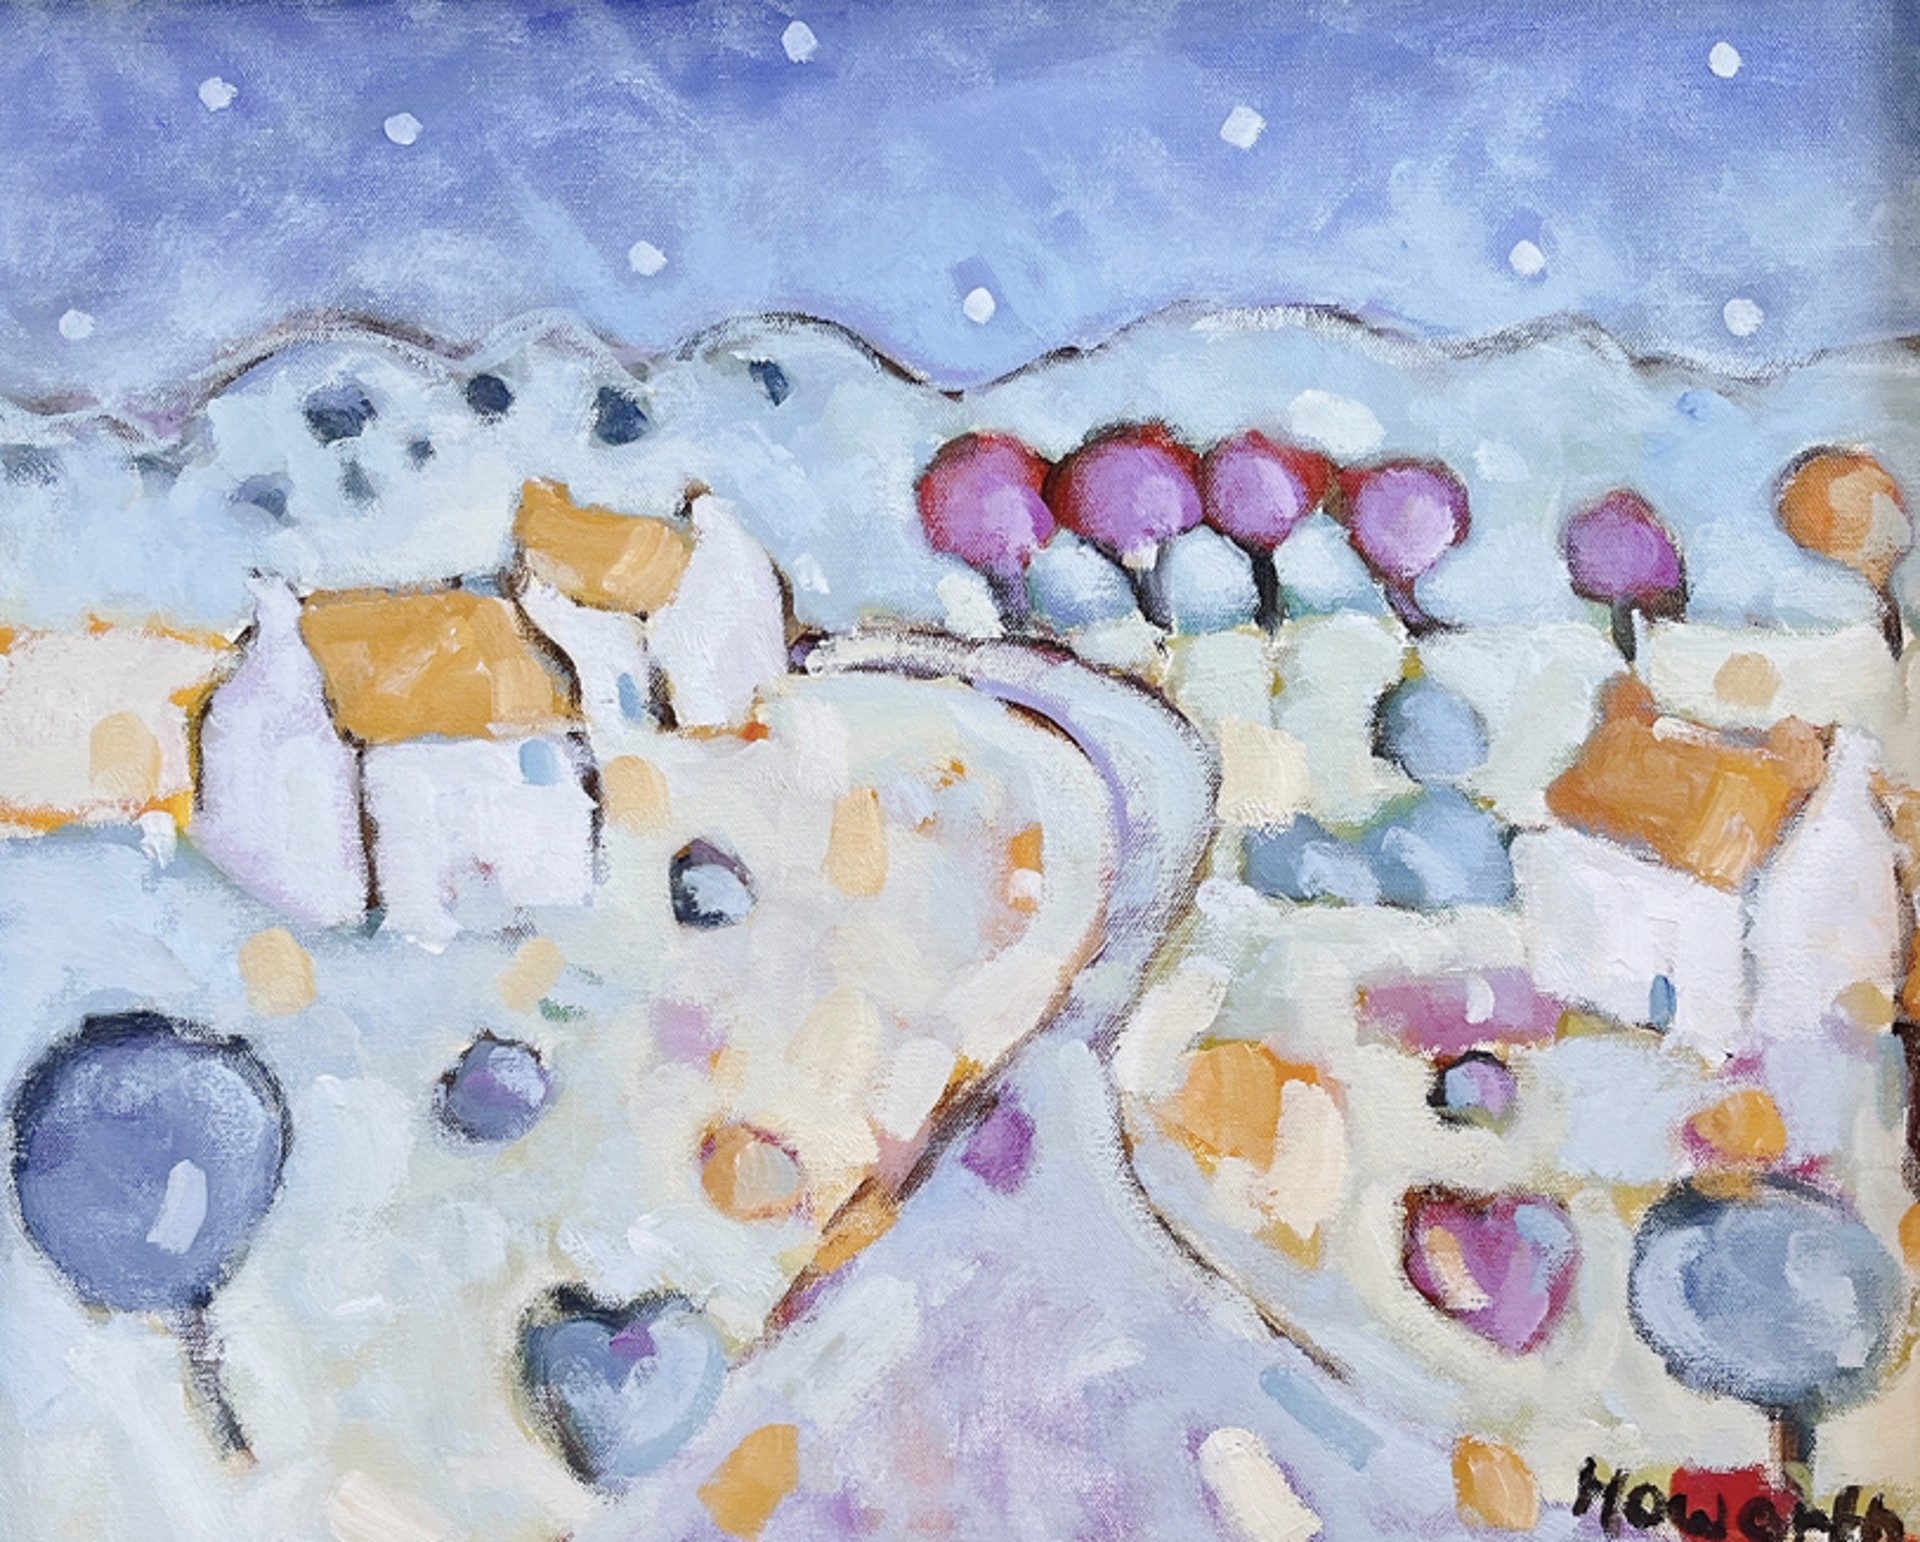 The First Snow by Katrina Howarth